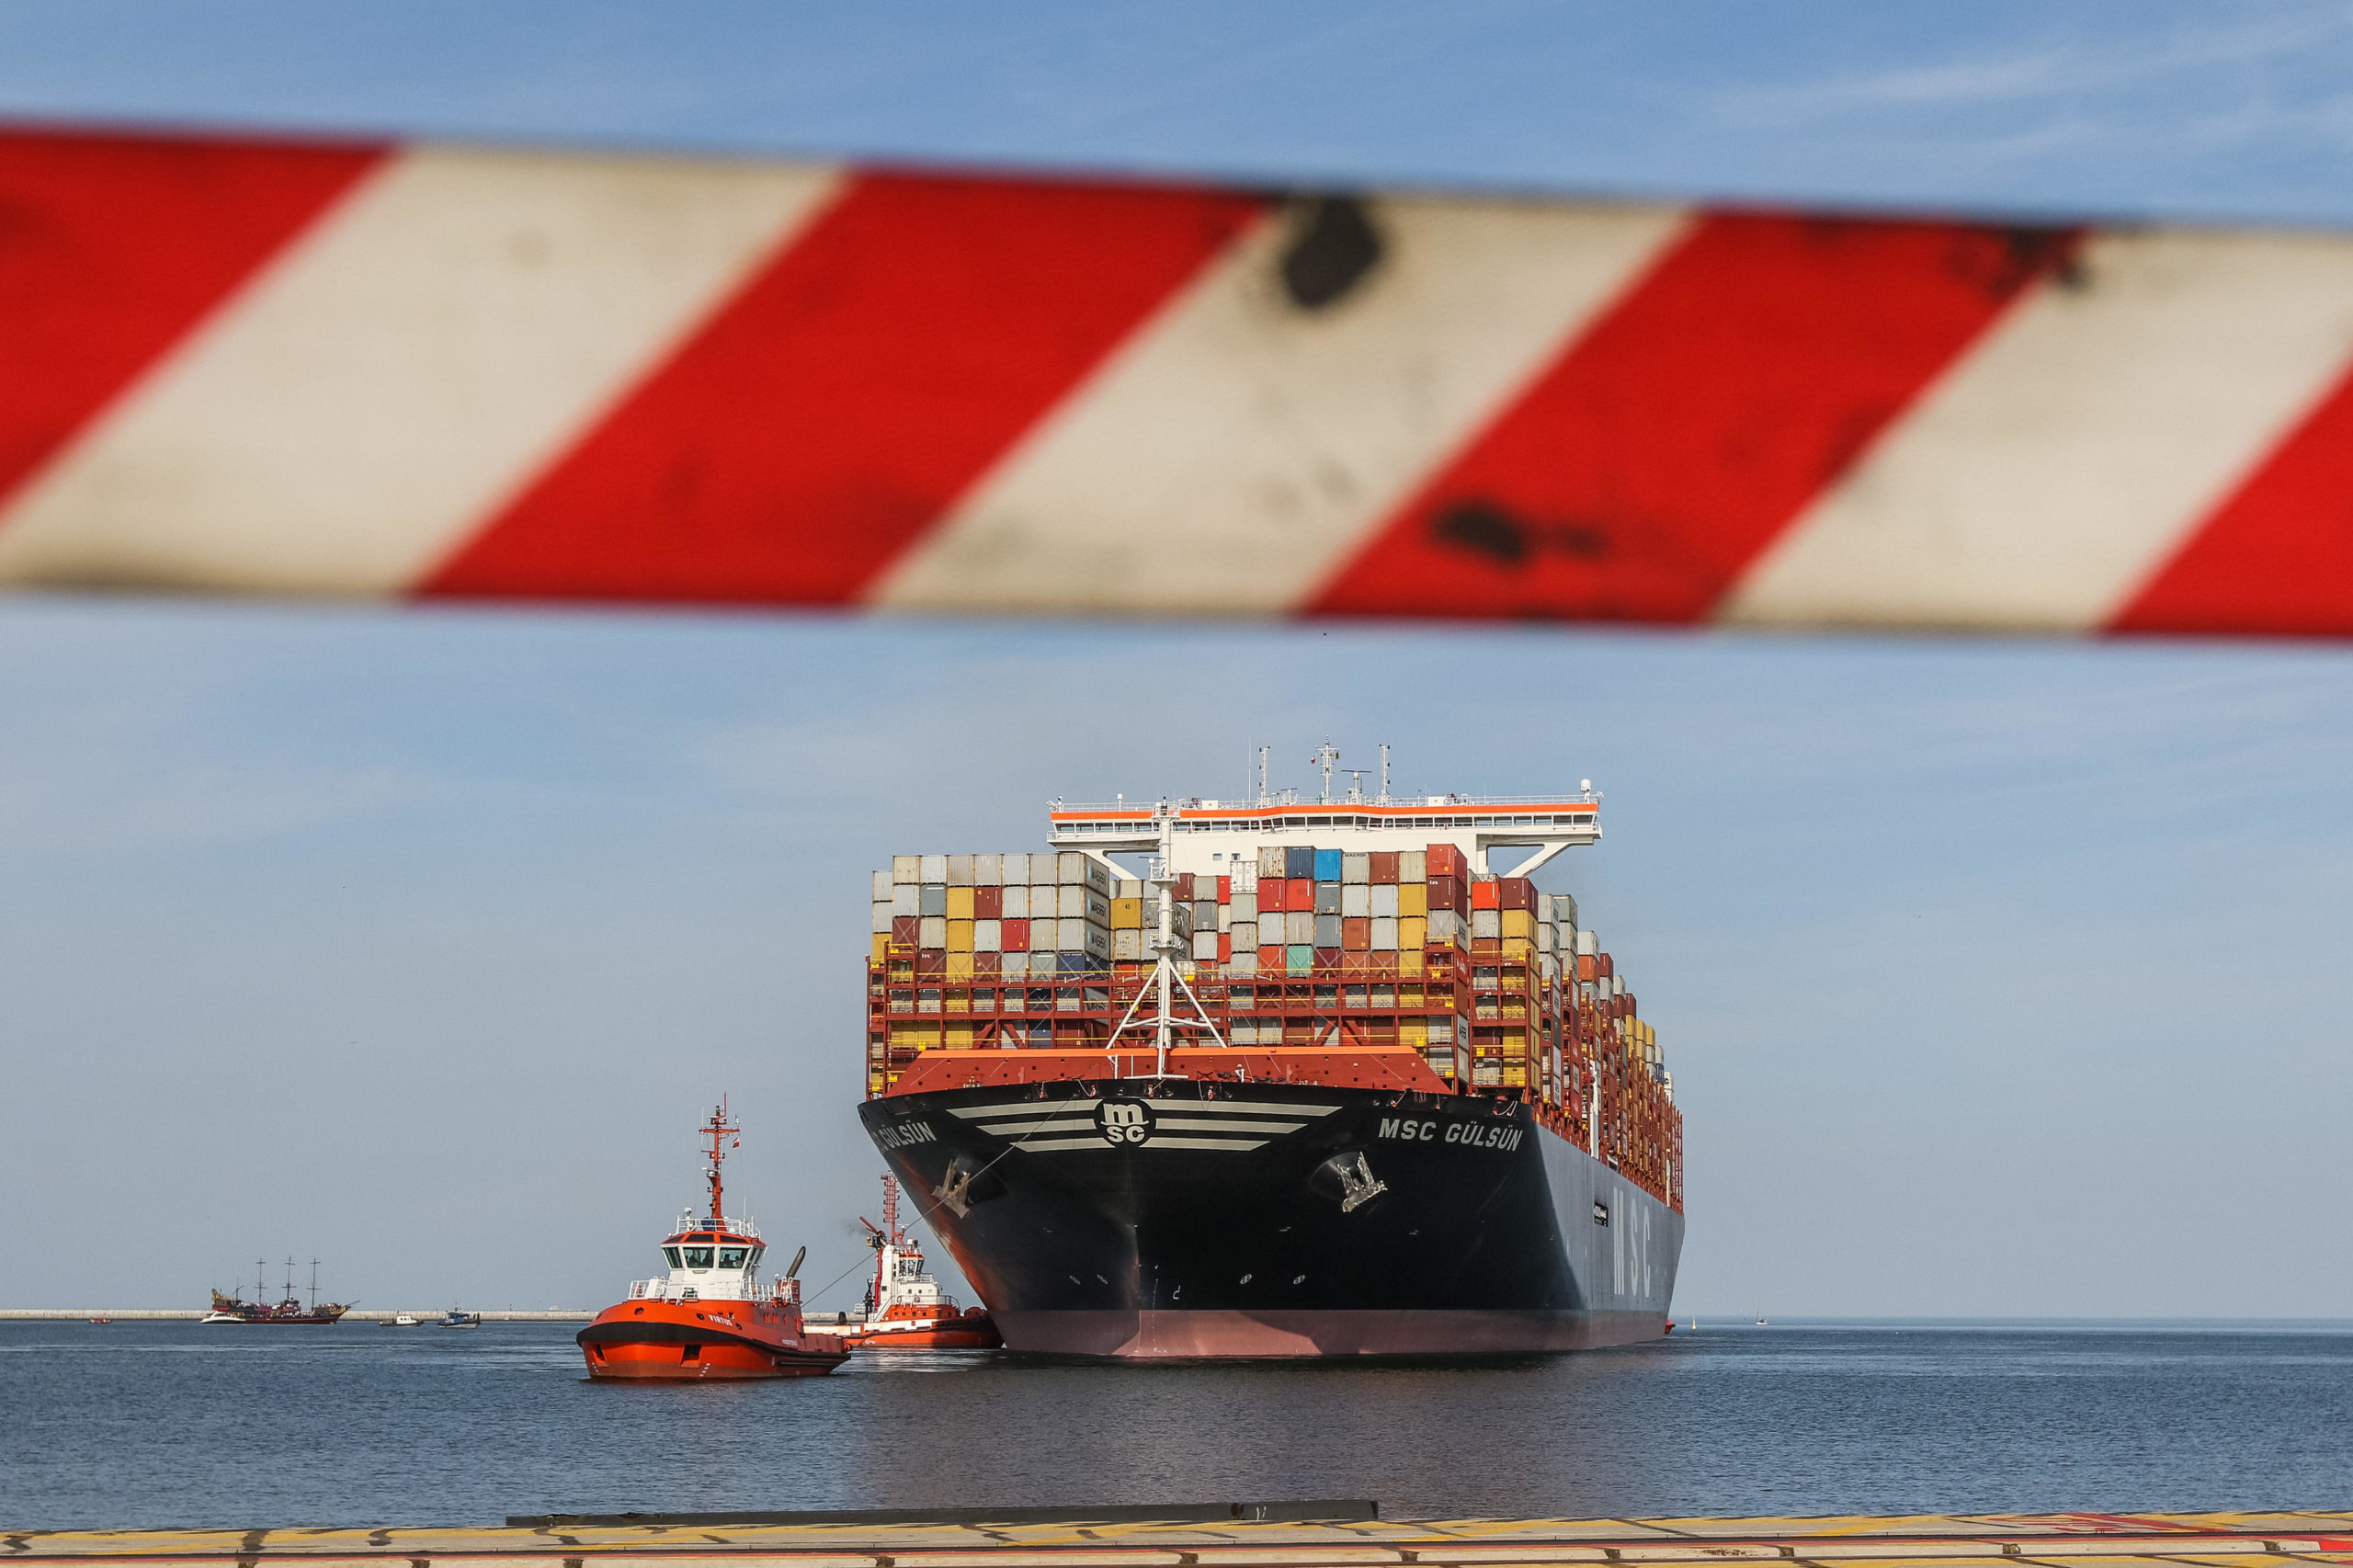 The largest container ship in the world entering the Port of Gdansk, Poland